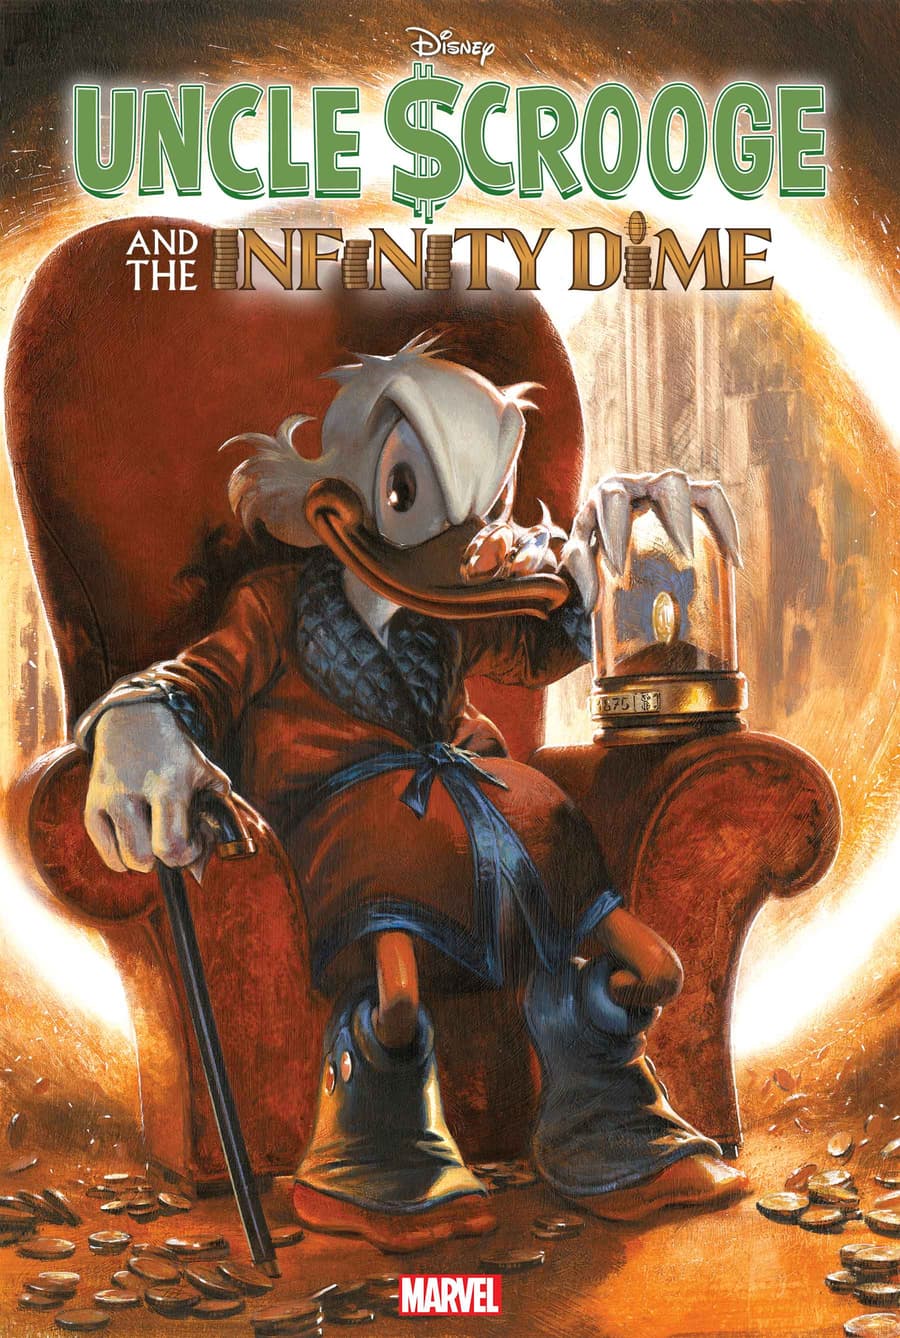 UNCLE SCROOGE AND THE INFINITY DIME #1 Variant Cover by Gabriele Dell'Otto